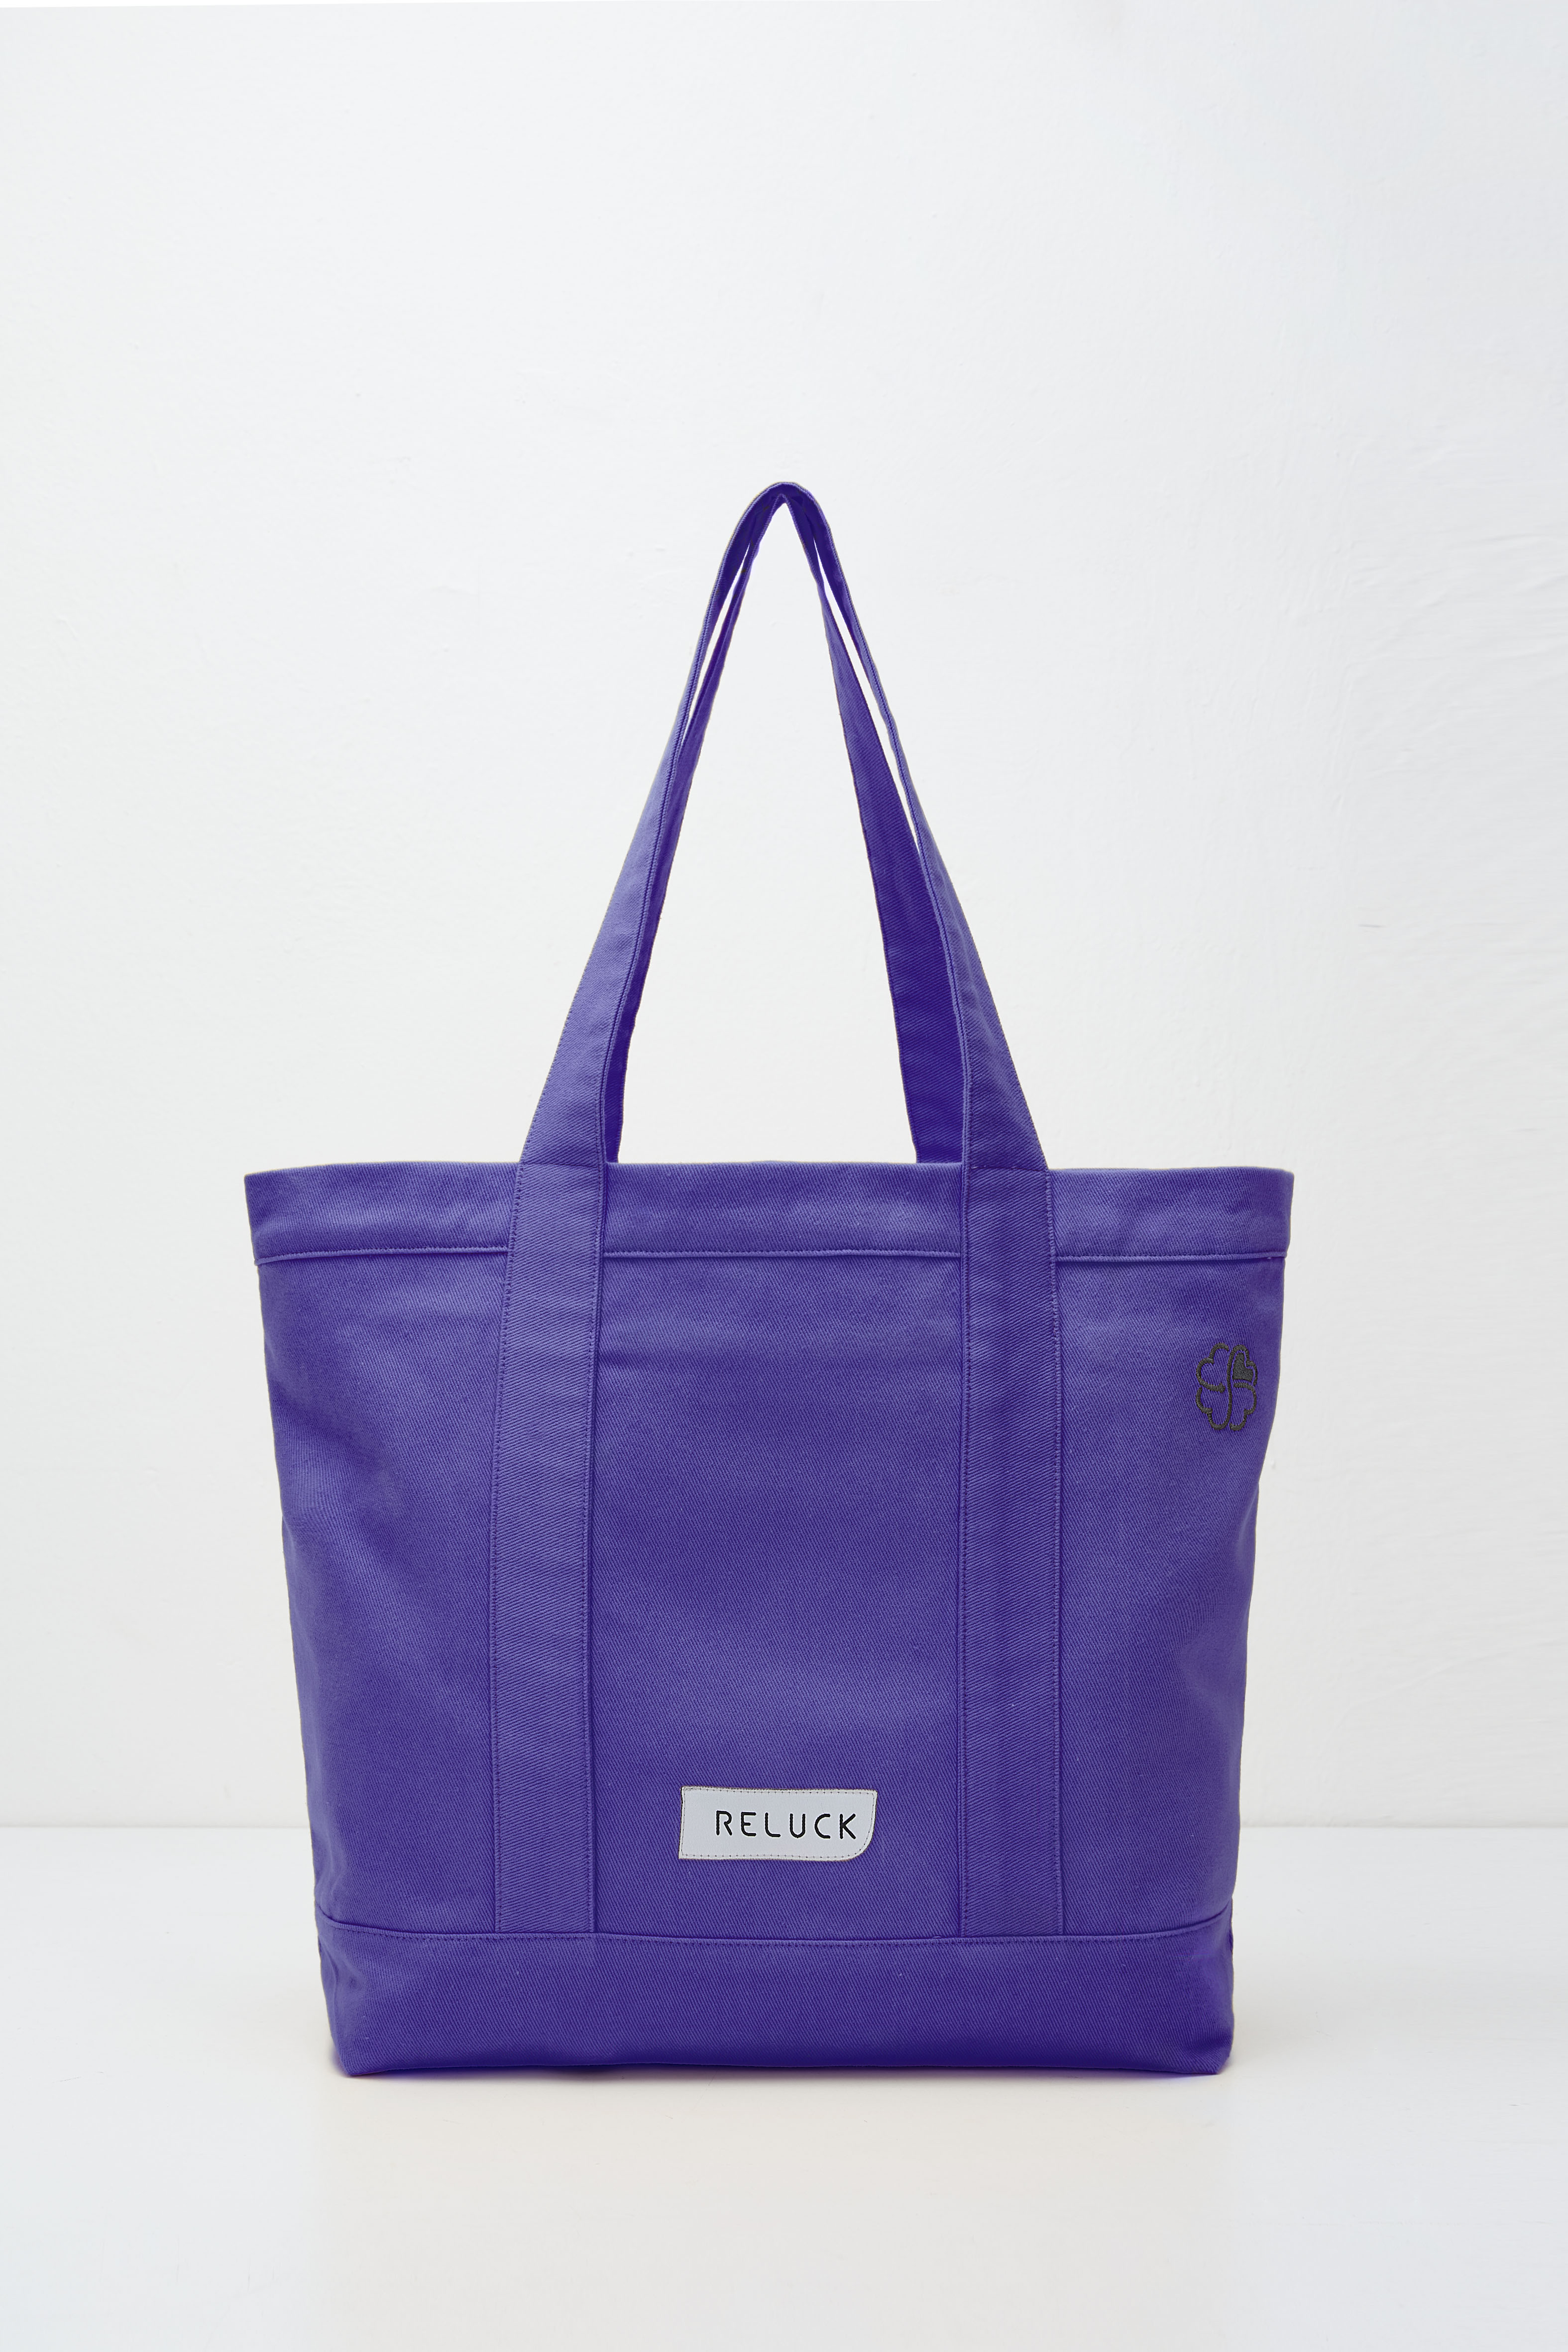 %100 RECYCLED DAILY TOTE BAG PURPLE